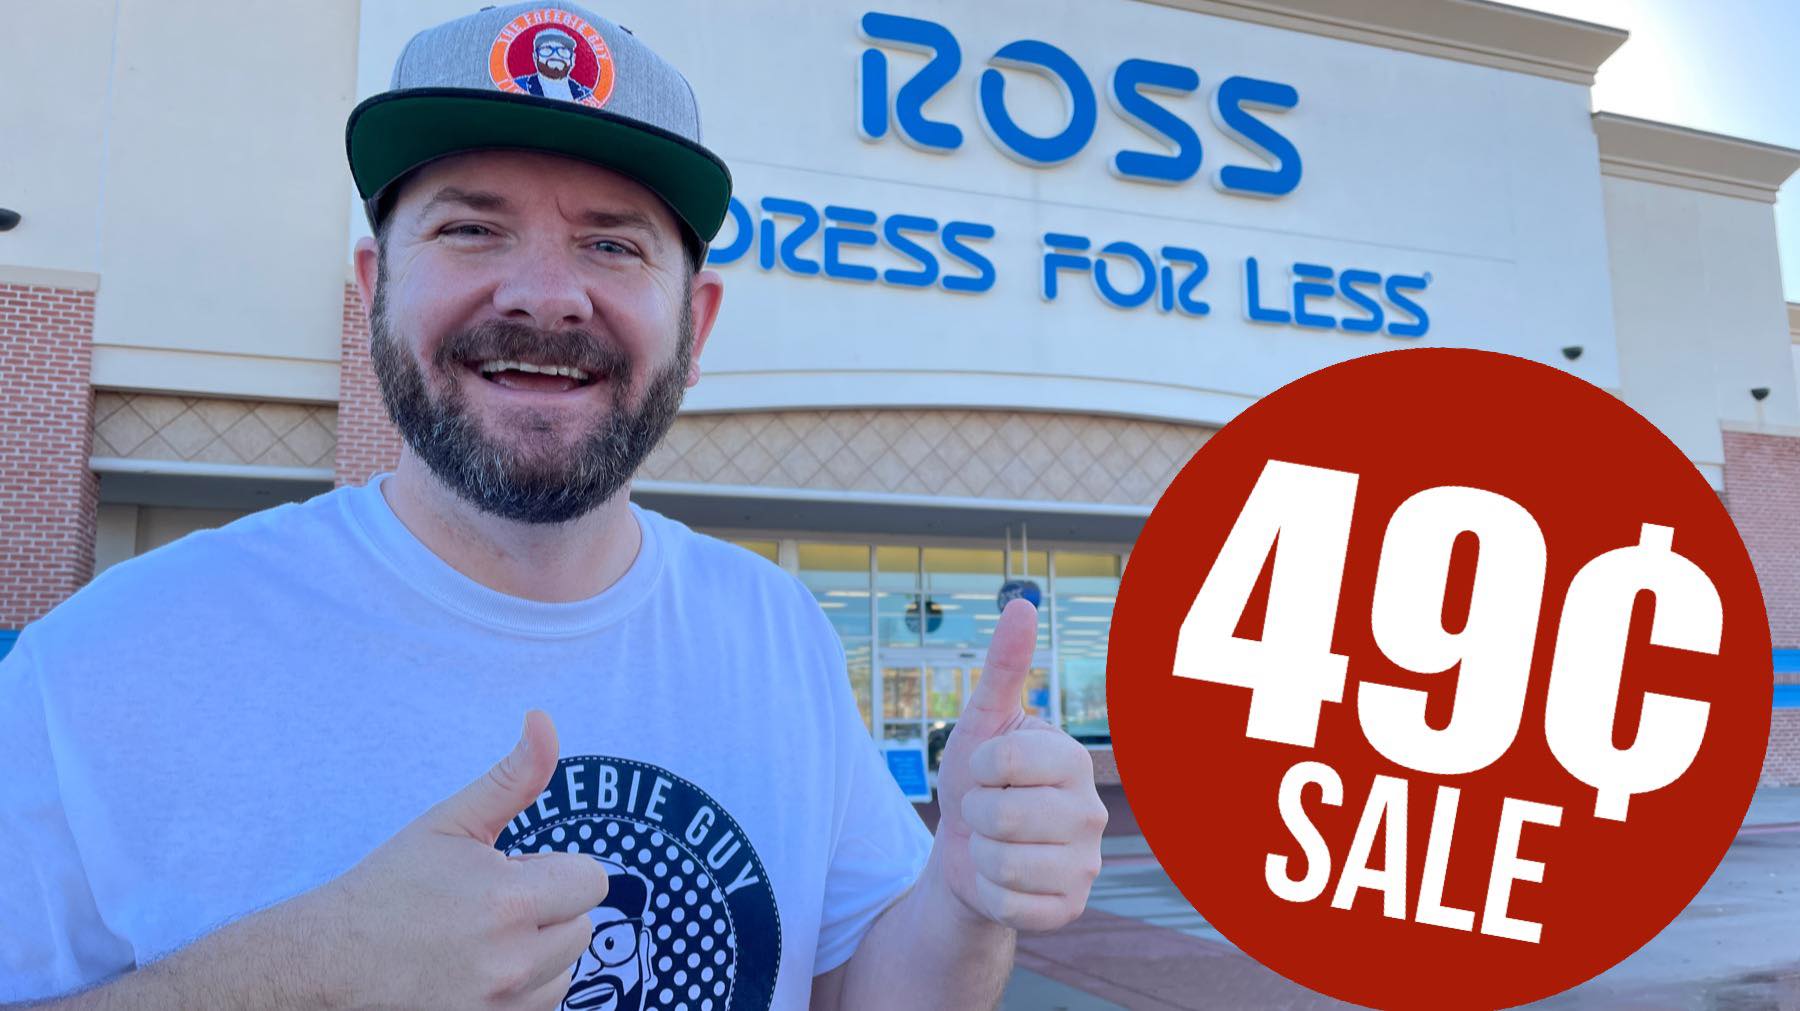 Get $ Items During the BIG Ross Clearance Sale - The Freebie Guy®